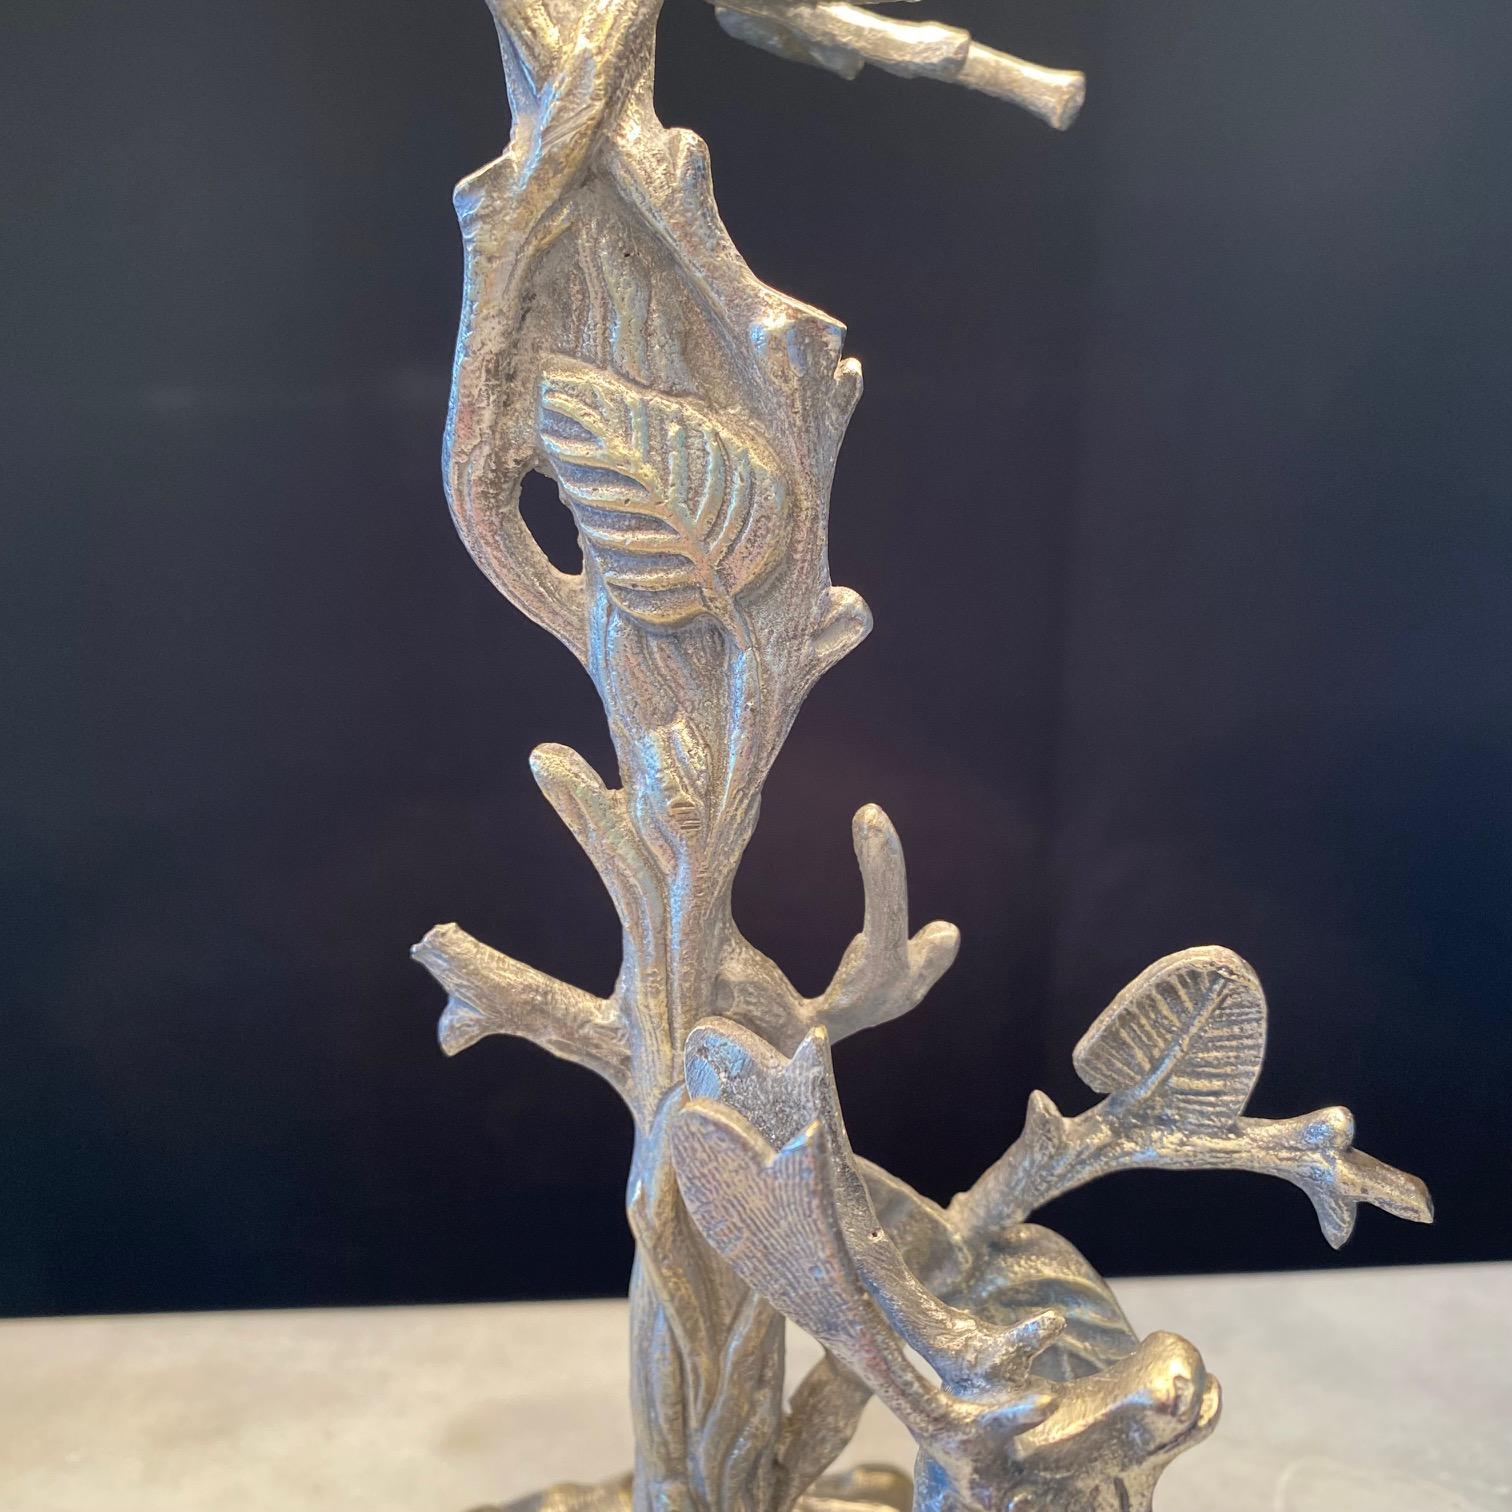  Silver Plated Bronze Deer Sculpture Table Lamp with Leaves and Twigs  2